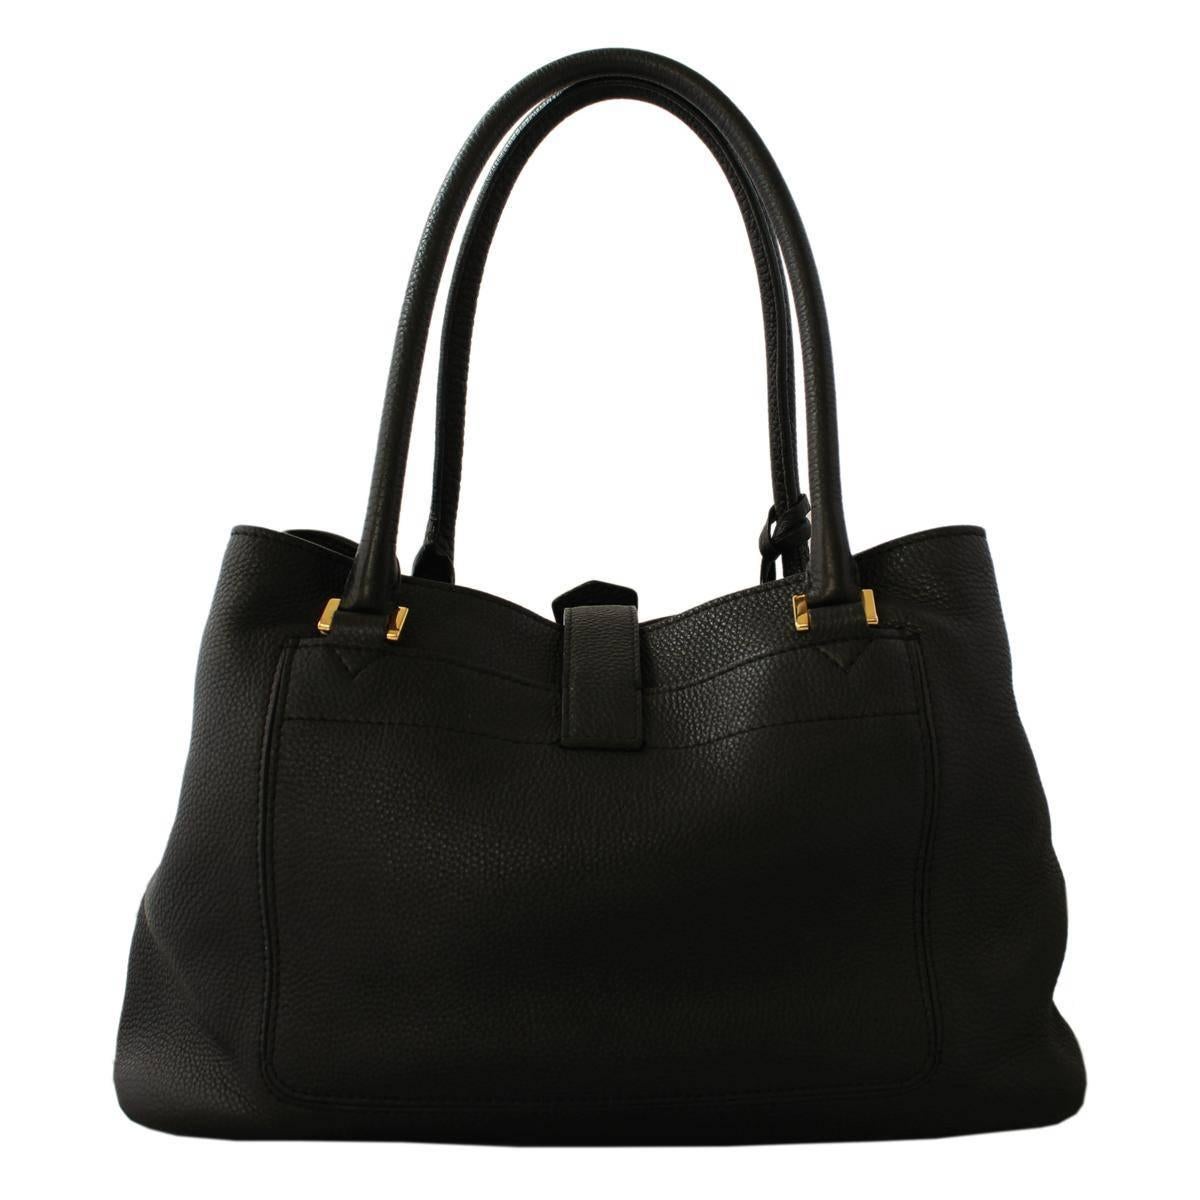 Very chic and elegant bag by Loro Piana
Supersoft Odessa grainé leather
Black color
Two handles
Belt closure
Double internal compartment
Two external pockets
Four internal pockets (two with zip) and phone holder
Cm 38 x 23 x 16 (14.9 x 9 x 6.3